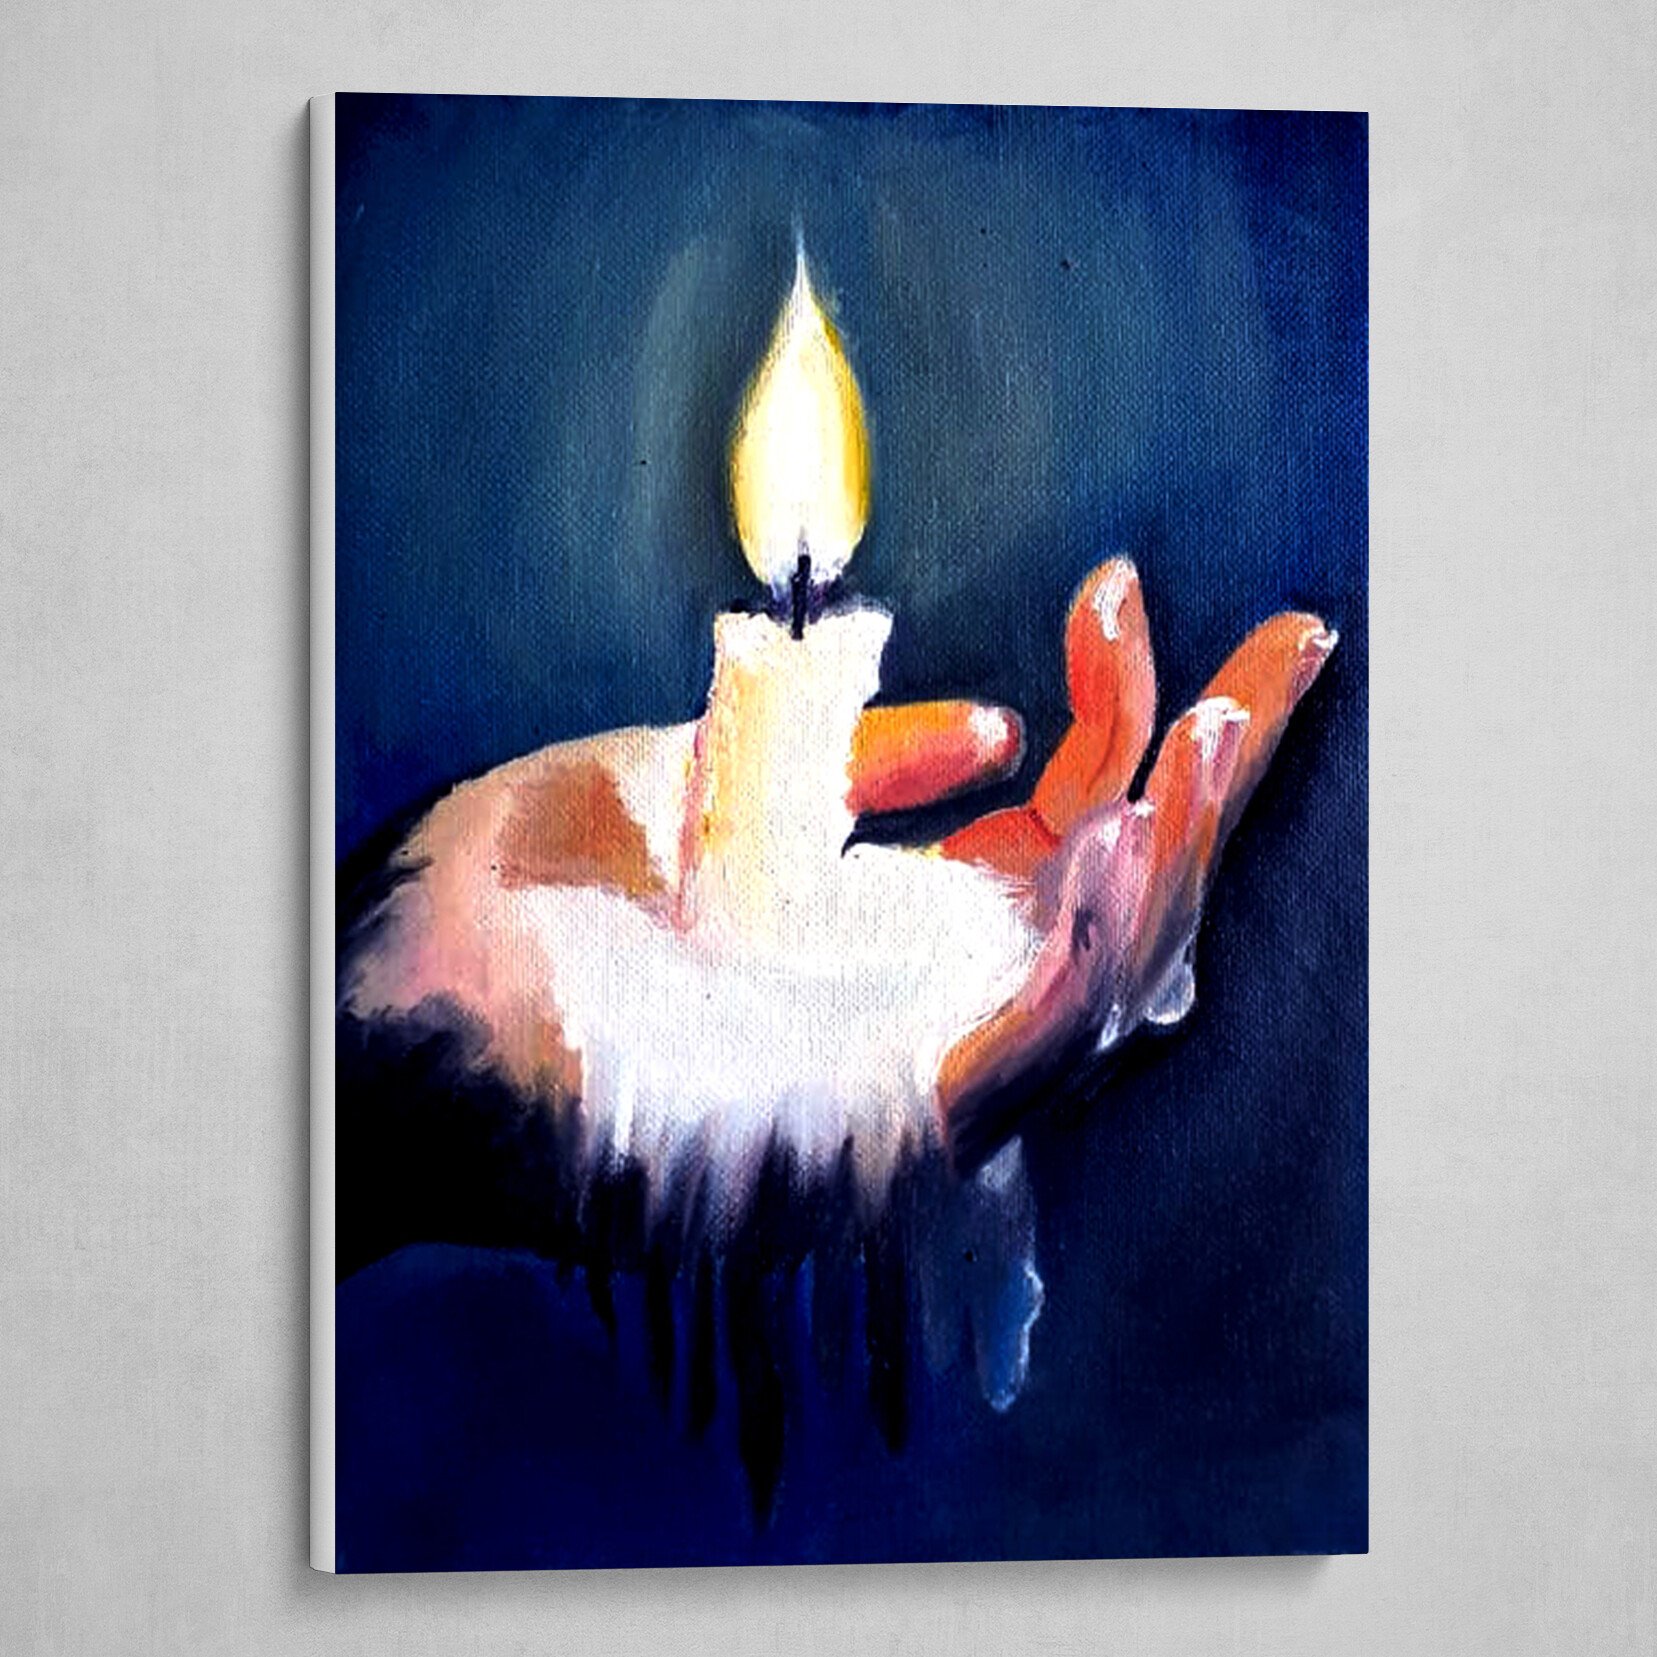 Candle Canvas Oil Painting by Lata Choudhary